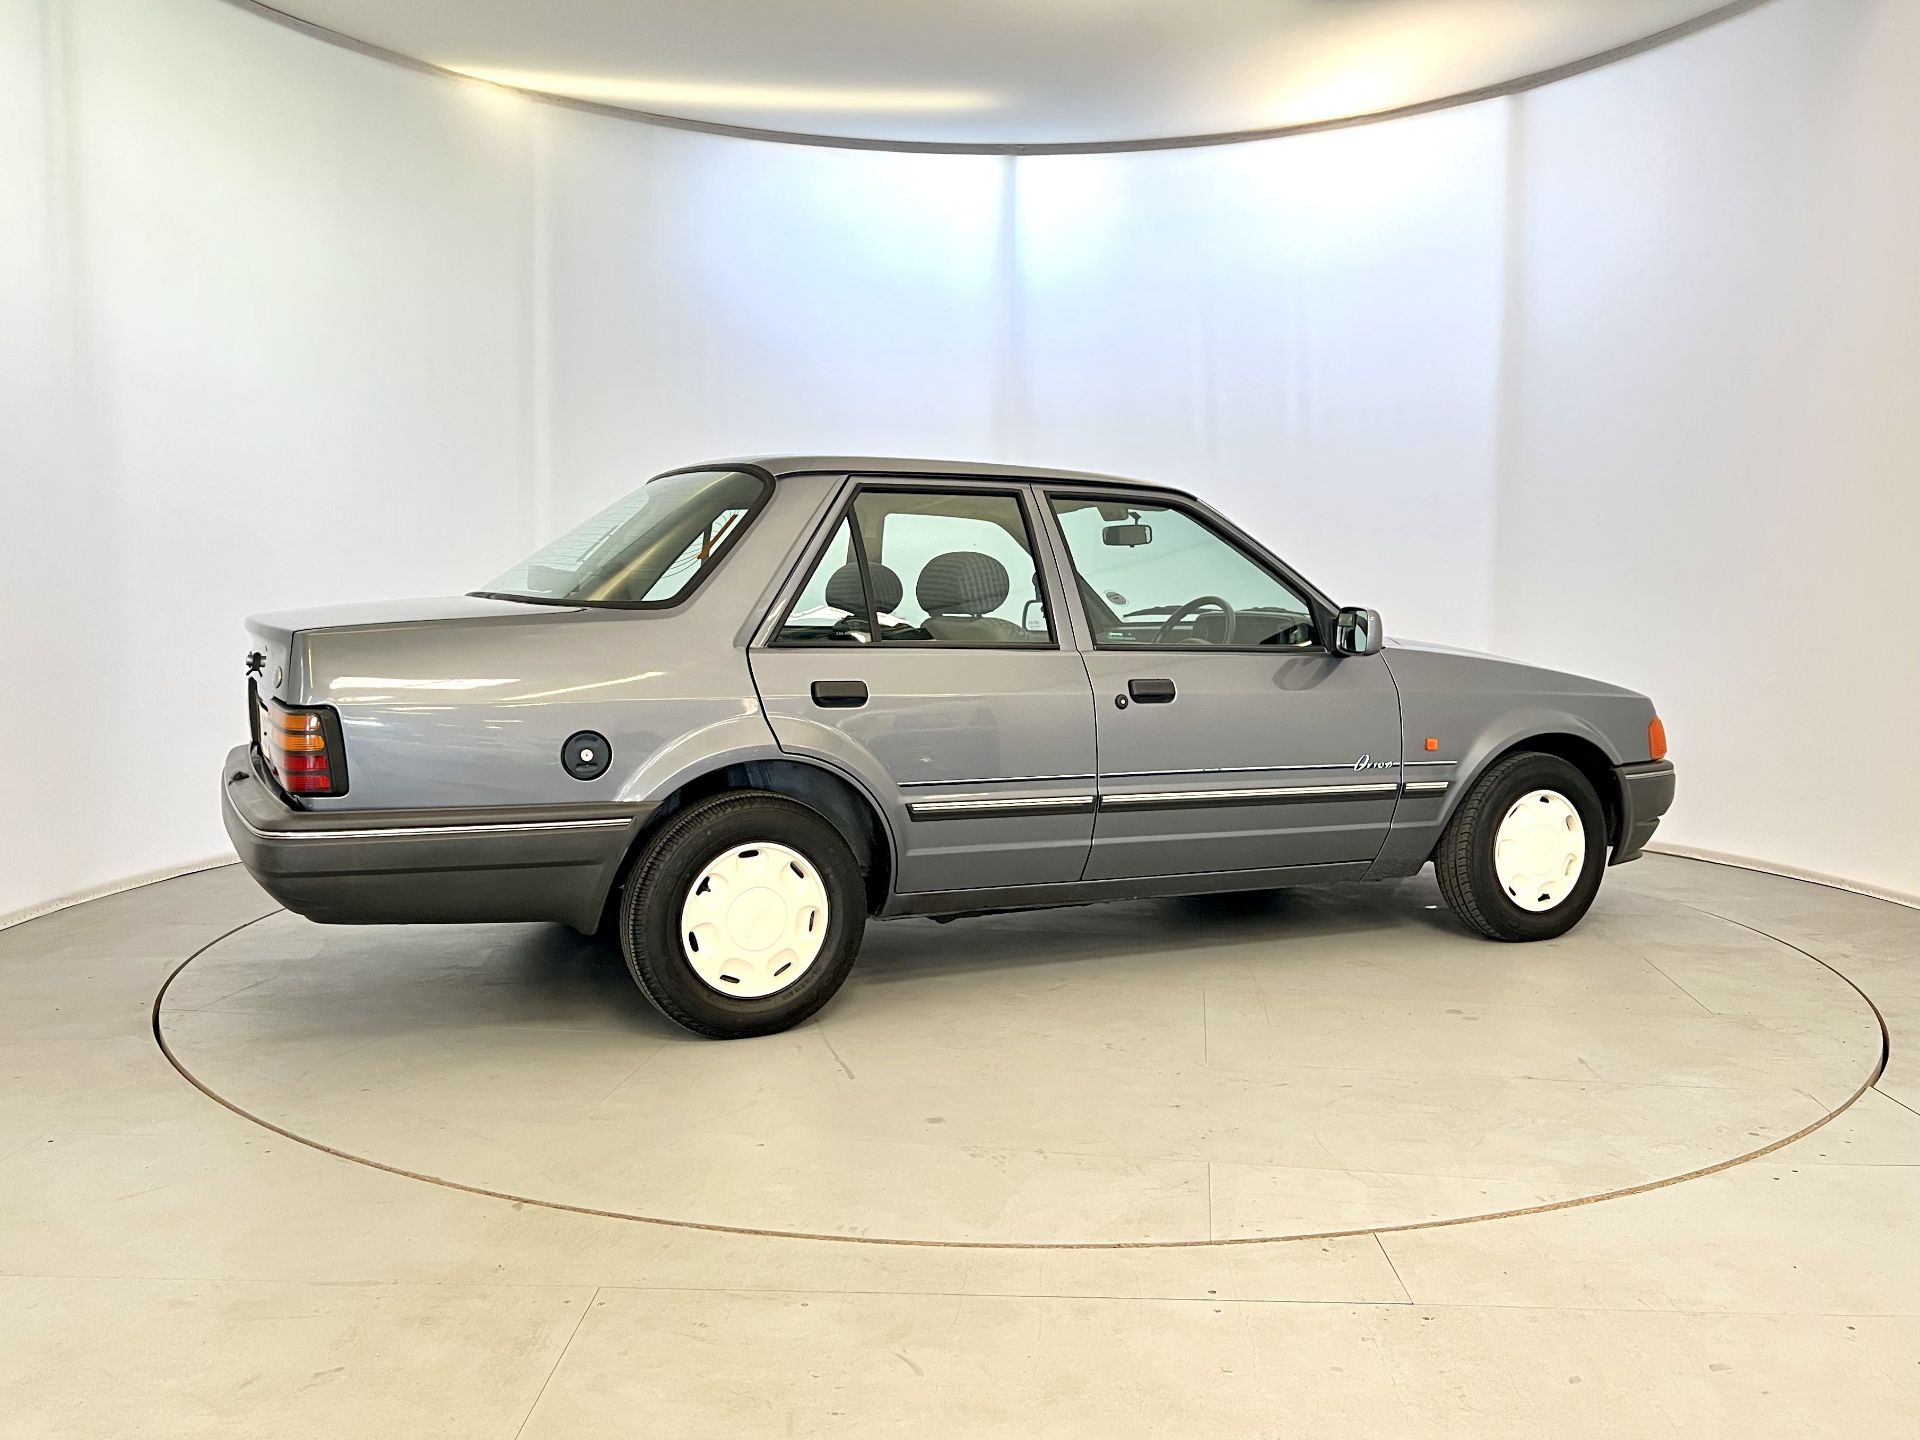 Ford Orion DX - Image 10 of 34